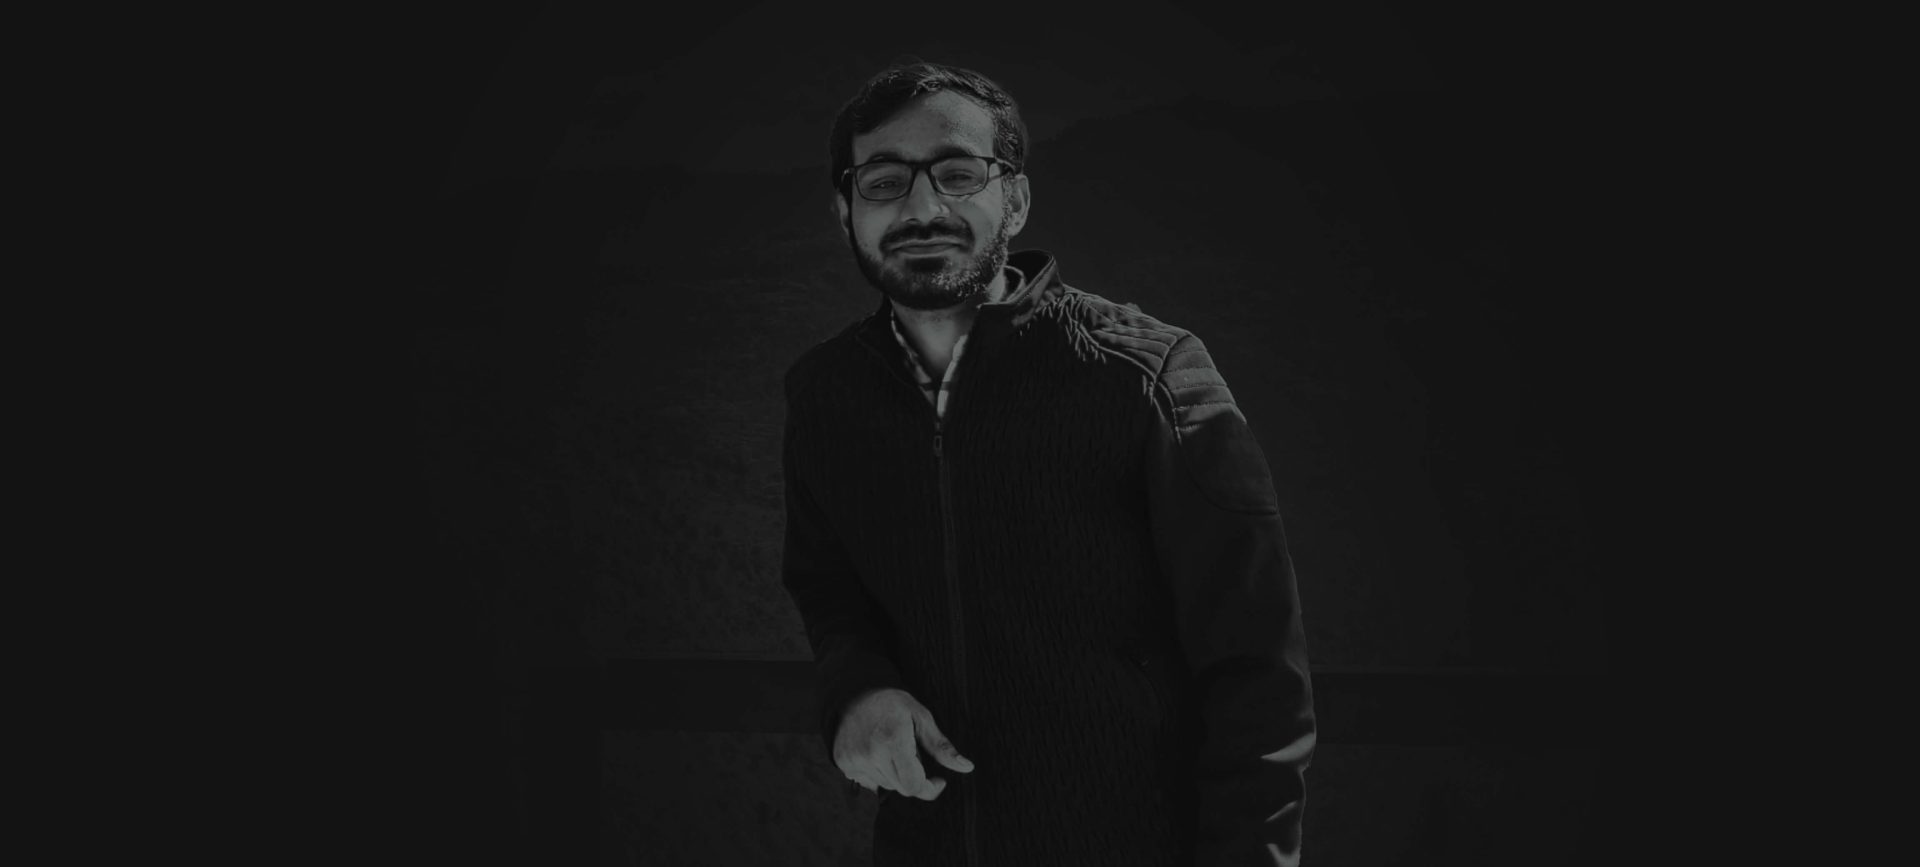 Hello, I’m <strong>Saqib Javed</strong>, Graphic Designer based in Pakistan with vast experience and proficiency in print and digital media designs.